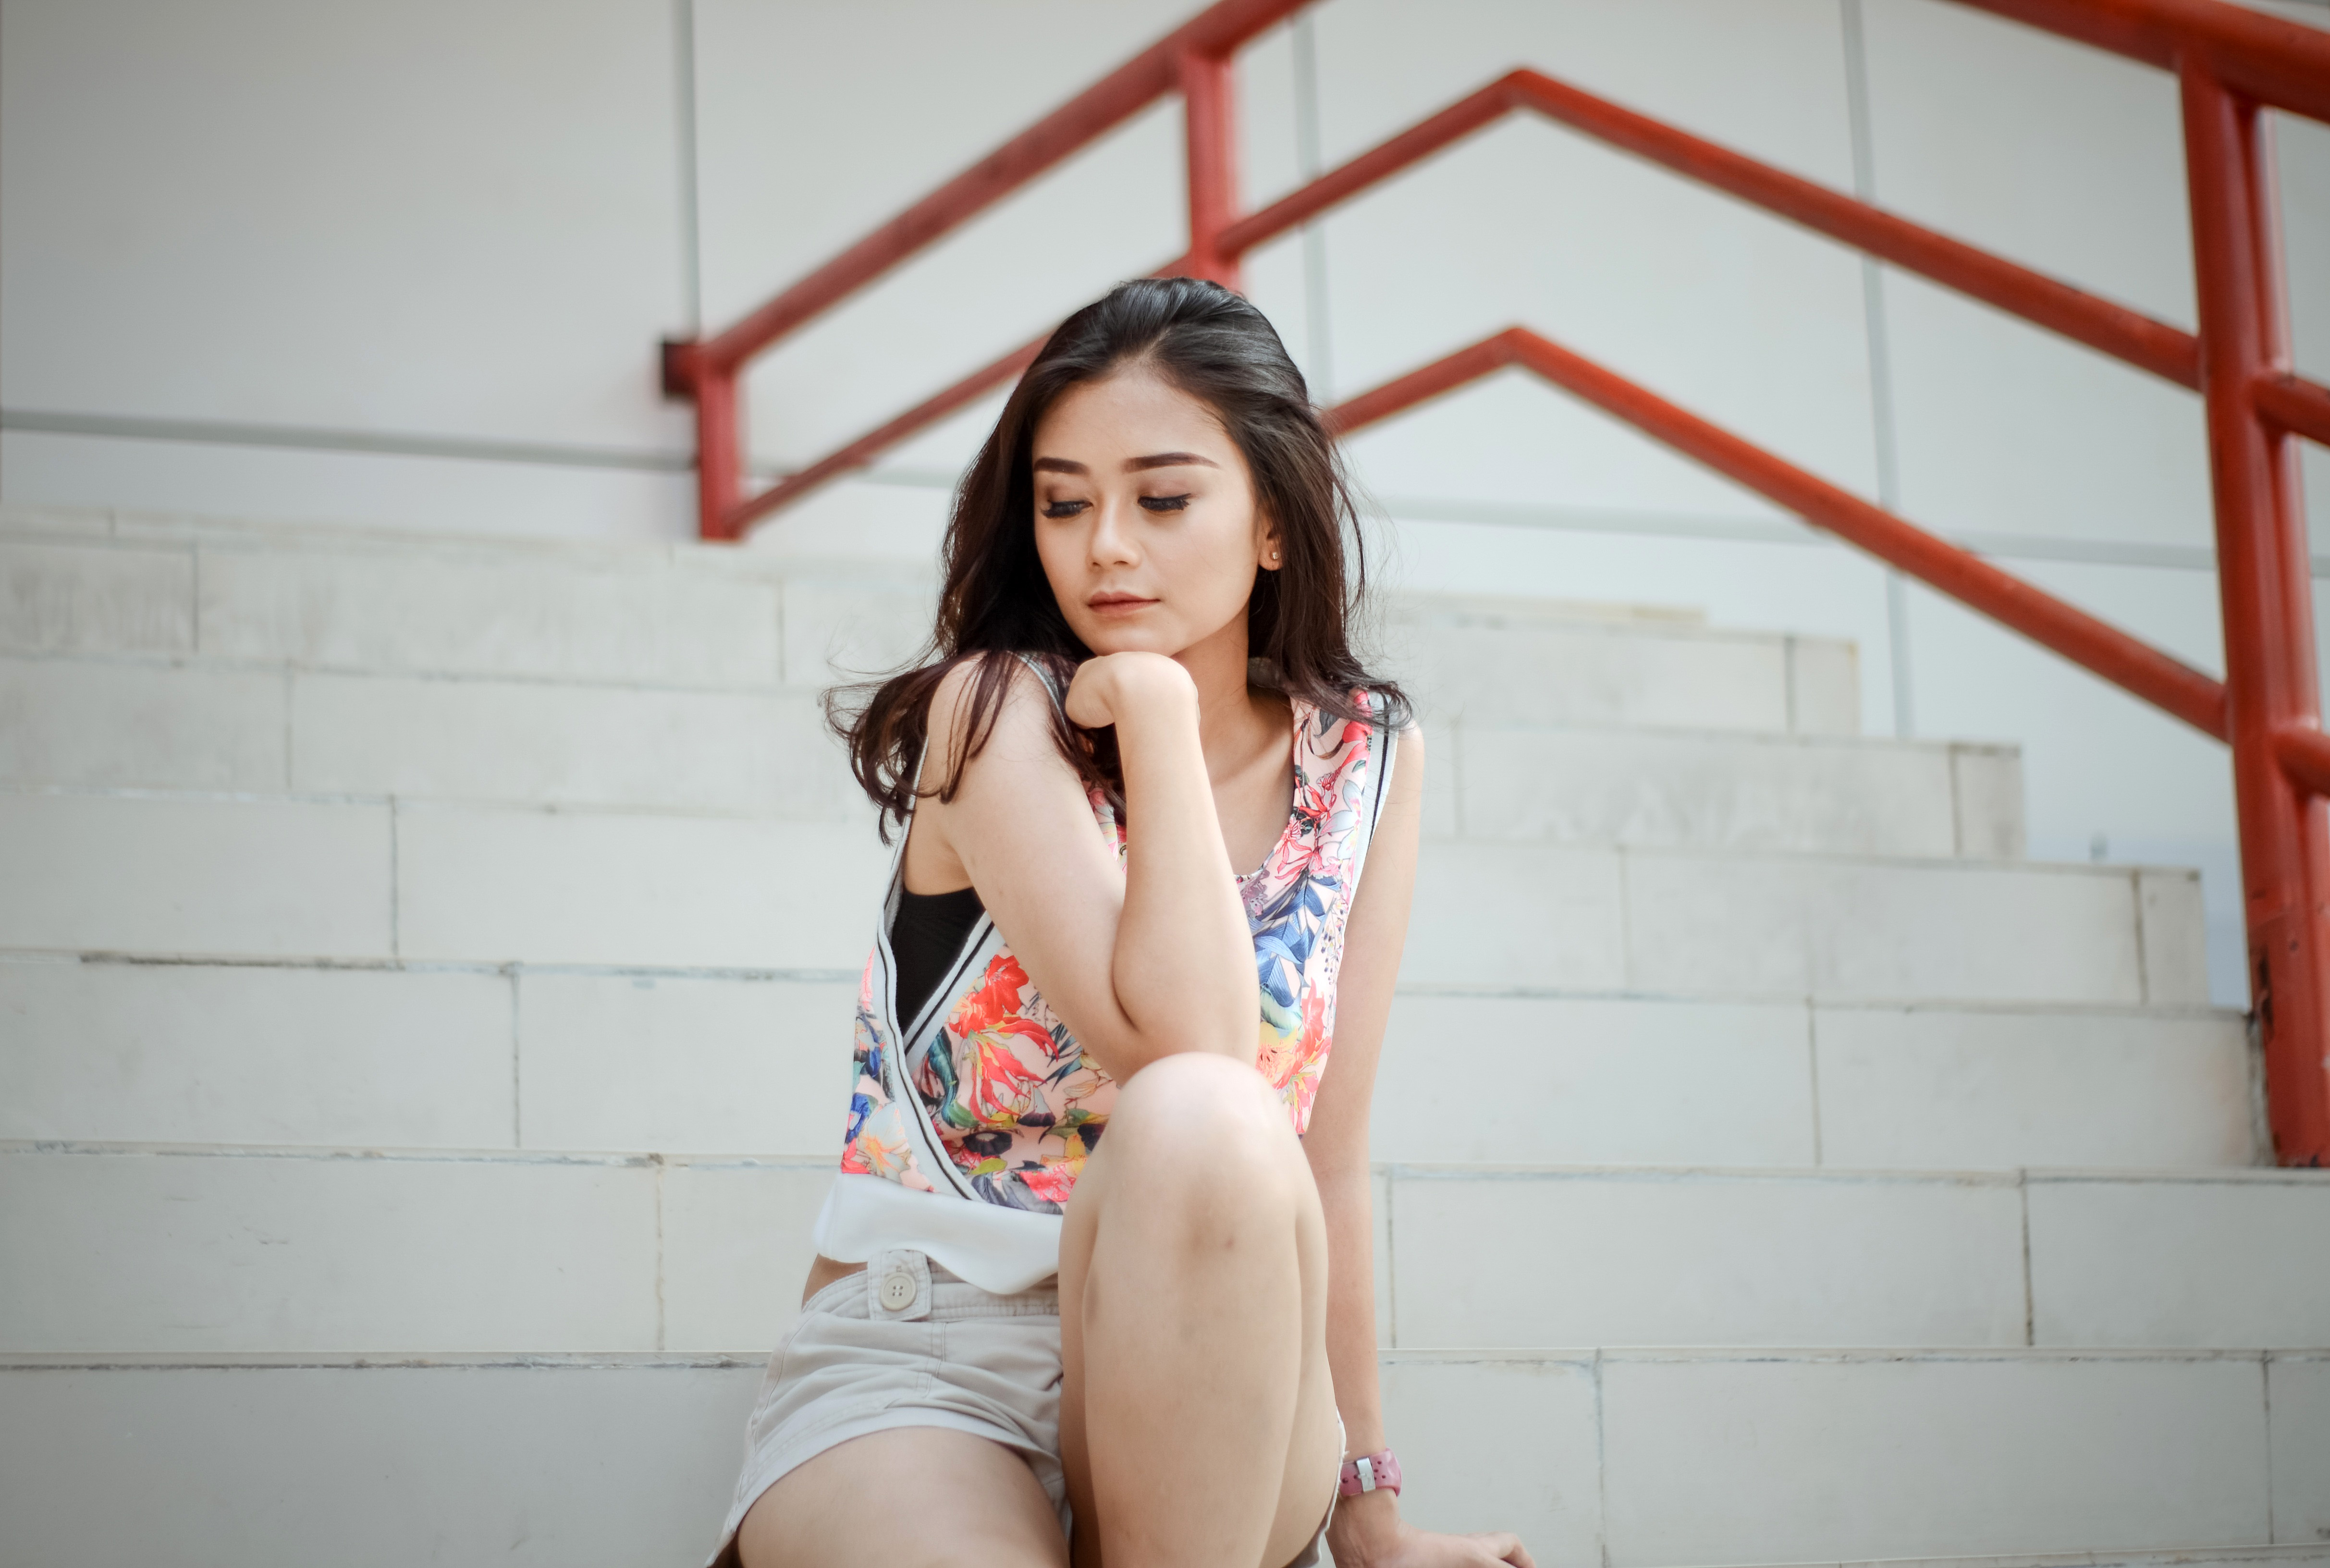 Cute Asian Girl Posing On The Steps Image Free Stock Photo